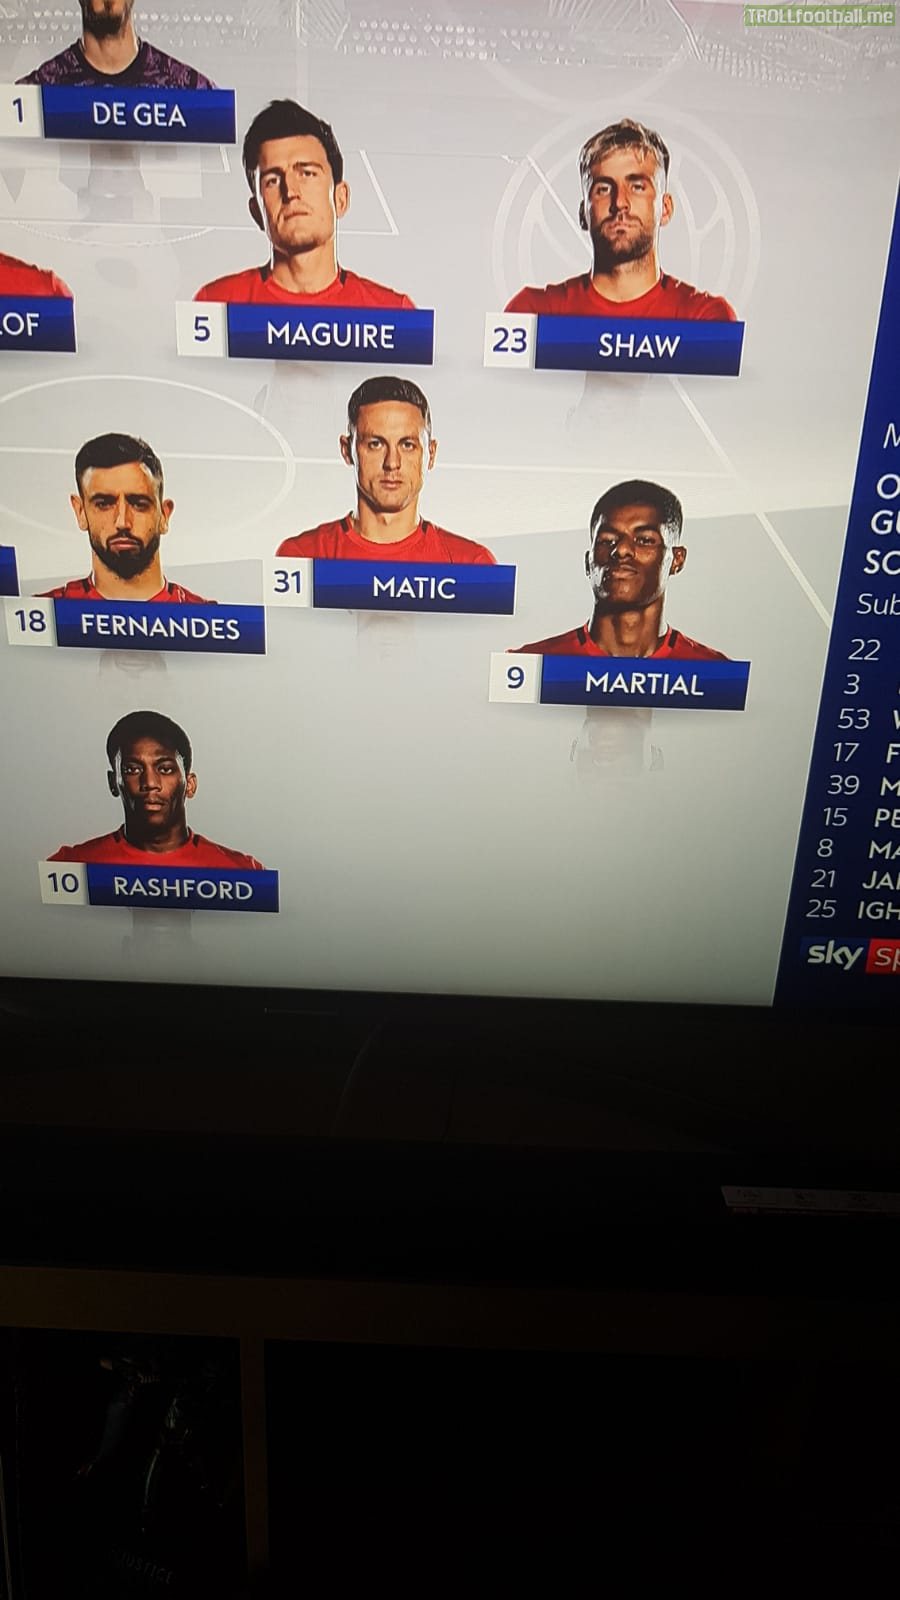 Man United's attackers look a bit different today